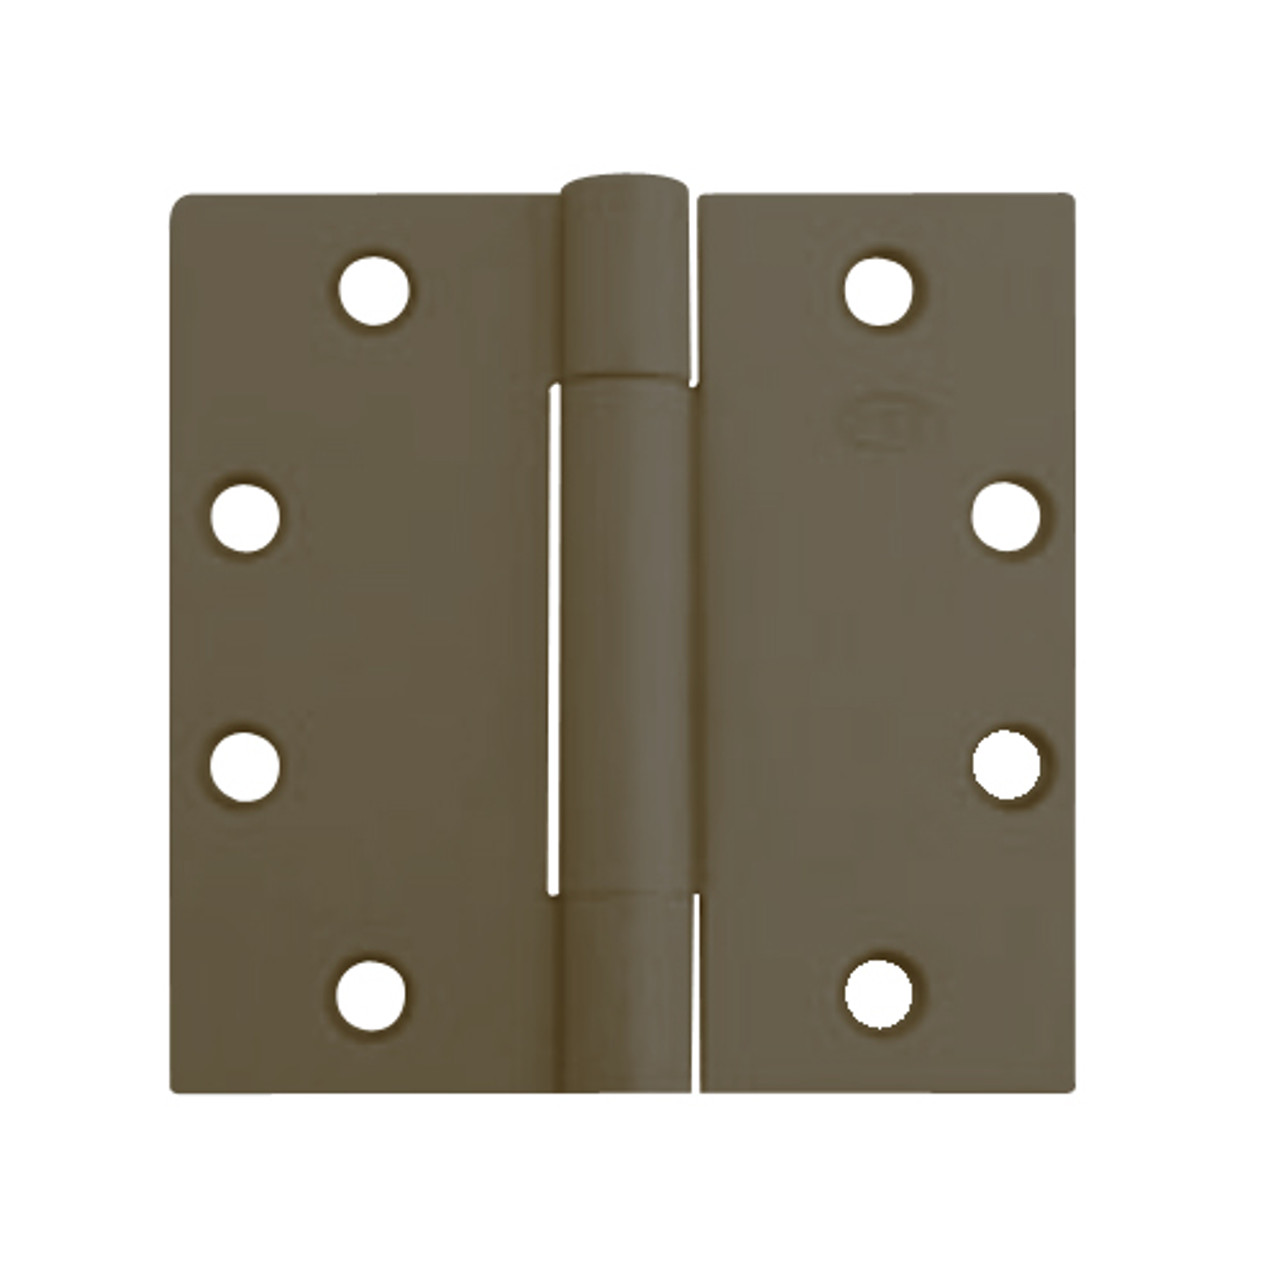 3CB1-5x4-5-613-TW8 IVES 3 Knuckle Concealed Bearing Full Mortise Hinge with Electric Thru-Wire in Dark Bronze